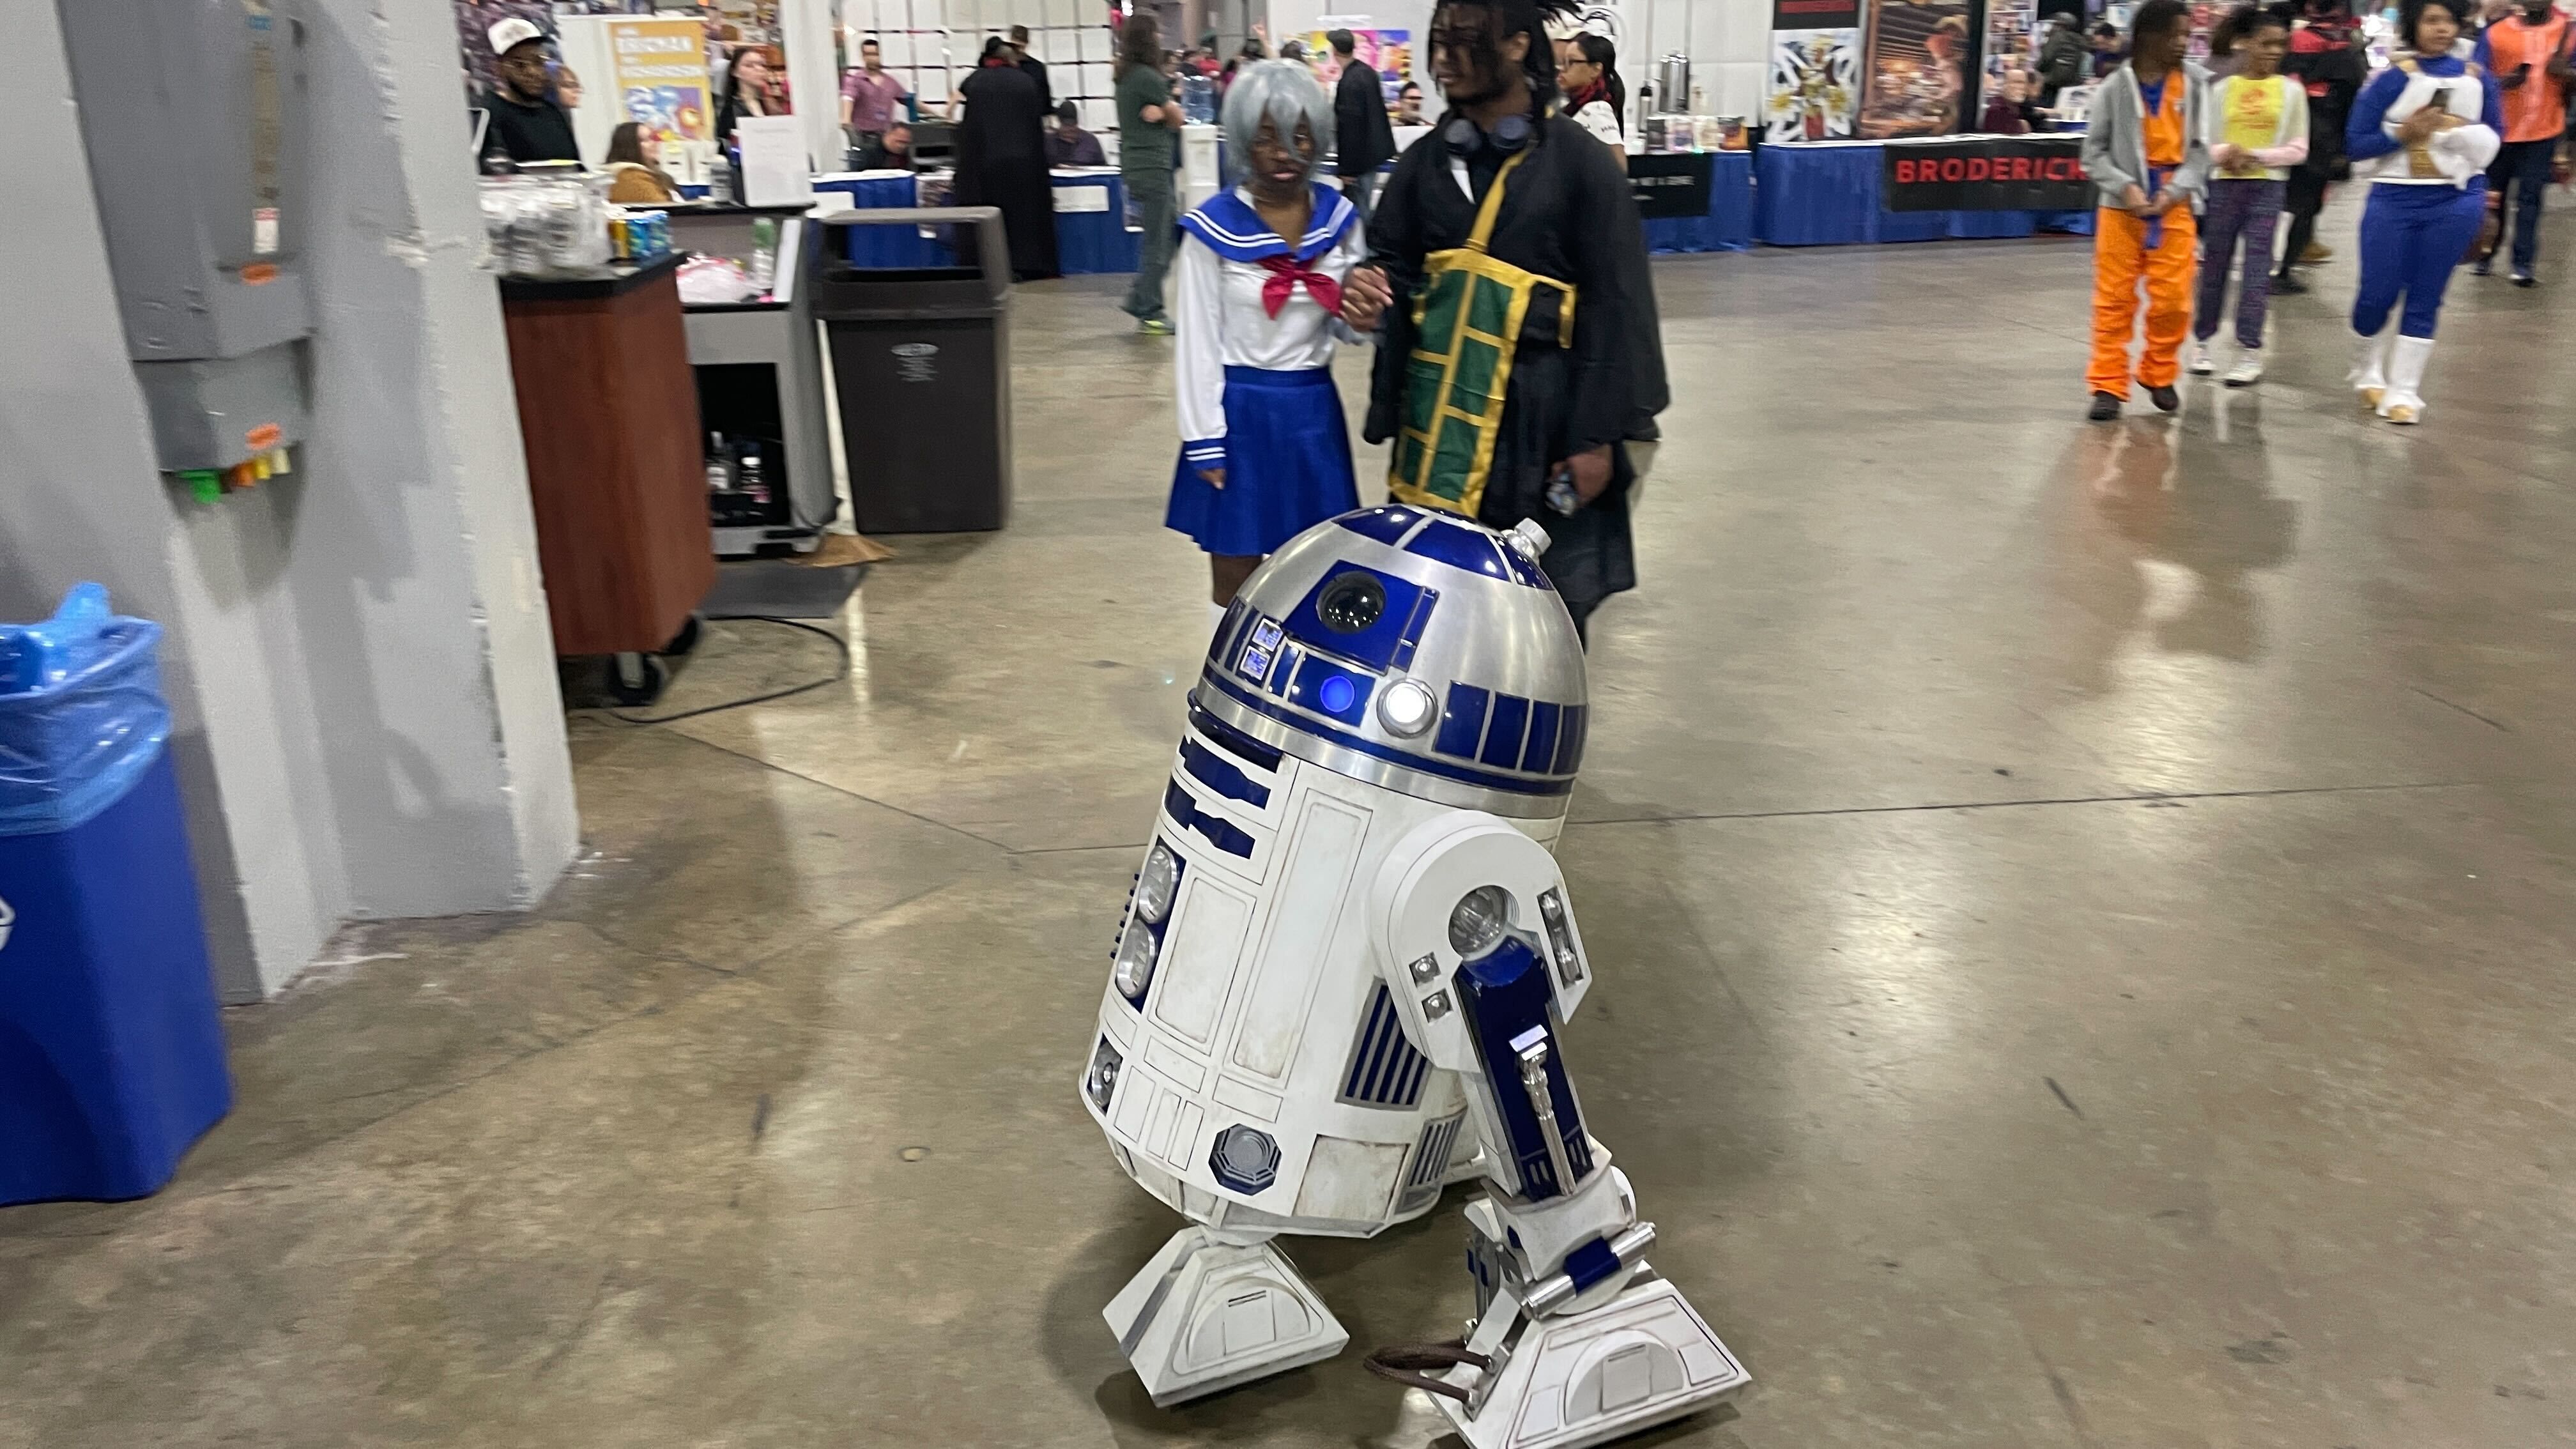 The popular R2-D2 robot character from the Star Wars franchise.